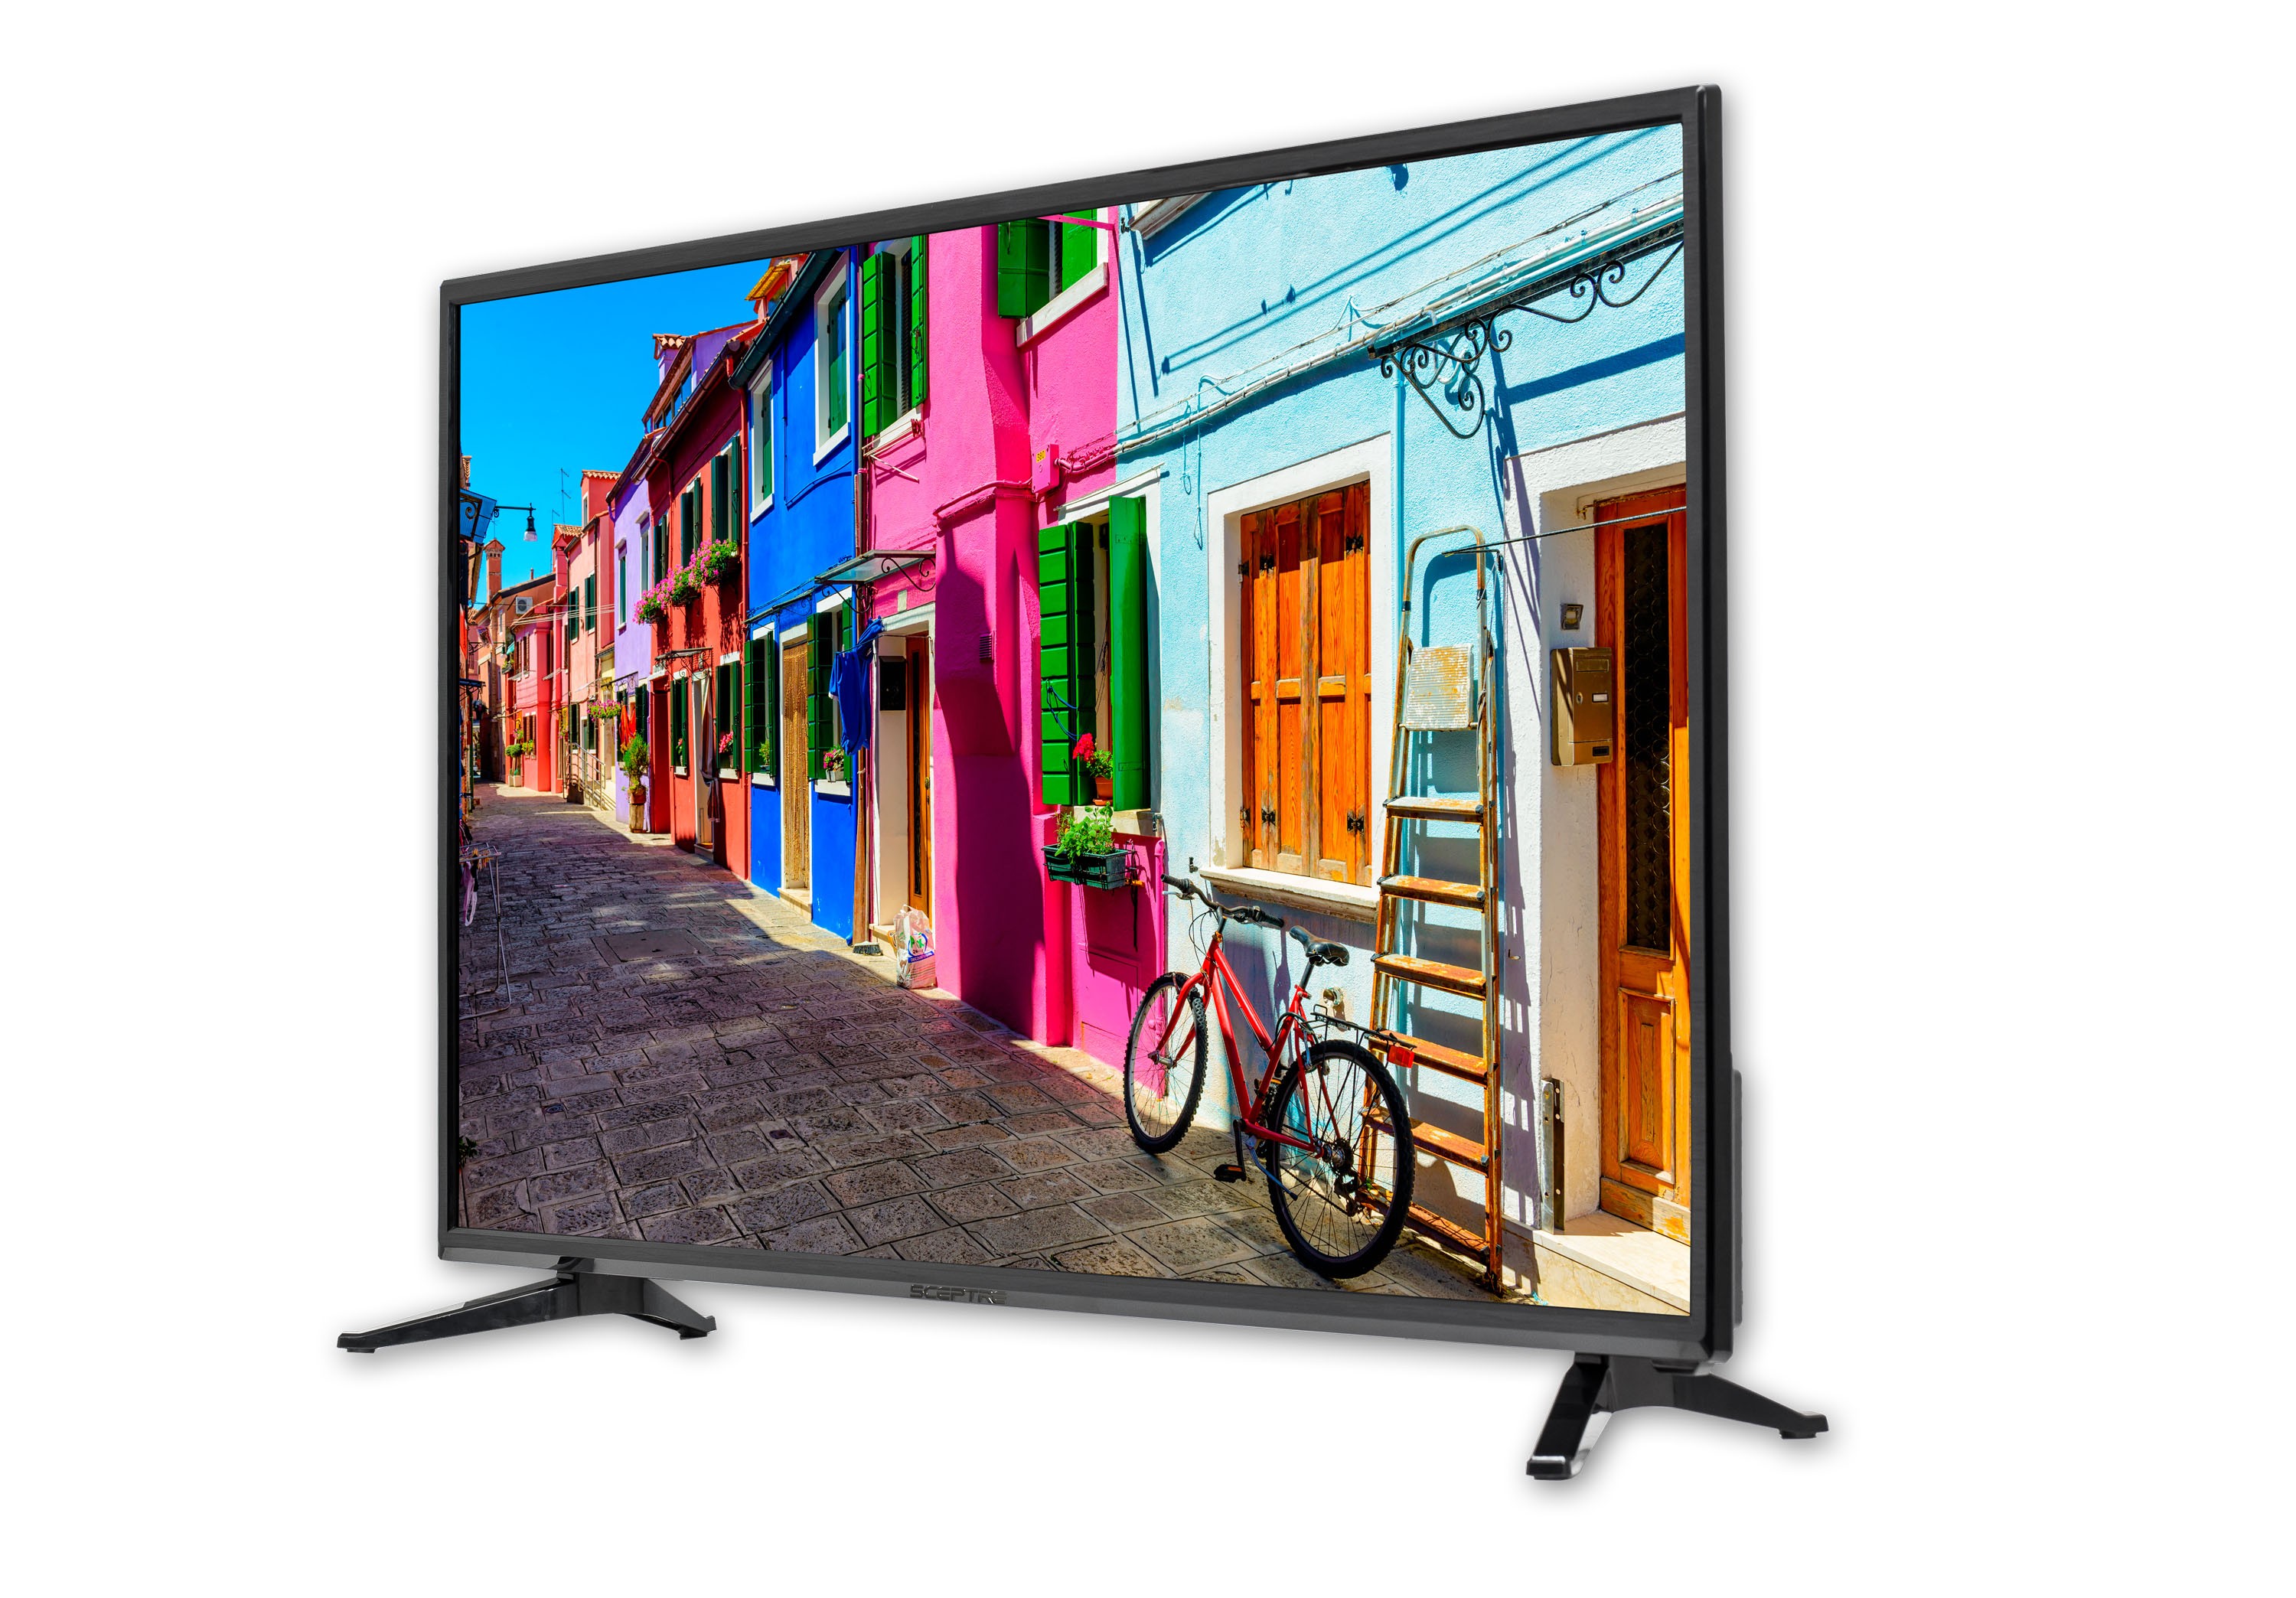 Sceptre 40" Class 1080P FHD LED TV with Built-in DVD E405BD-F - image 5 of 8